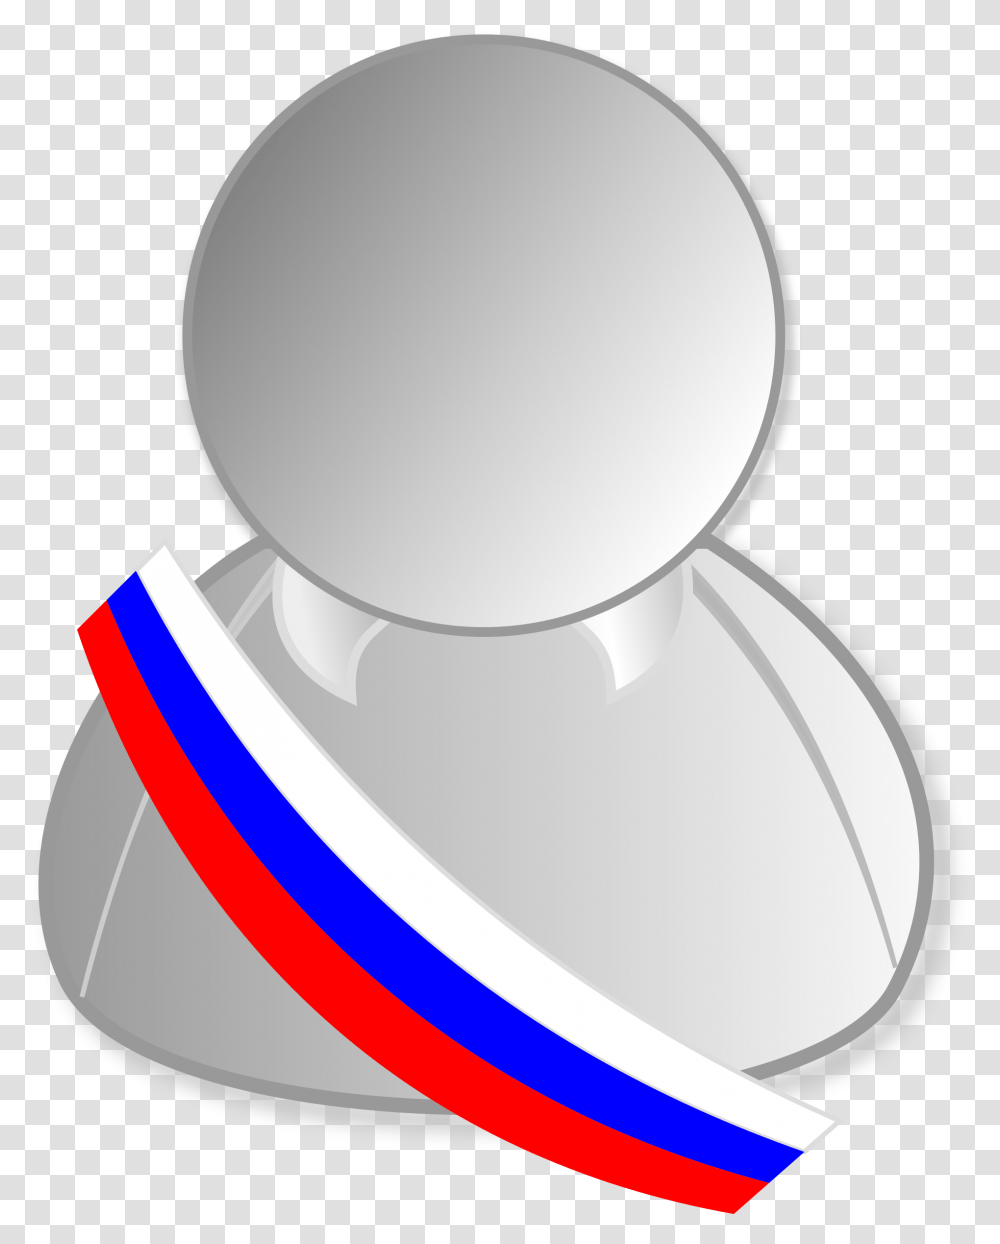 Russia Politic Personality Icon Dot, Trophy, Magnifying, Mirror Transparent Png